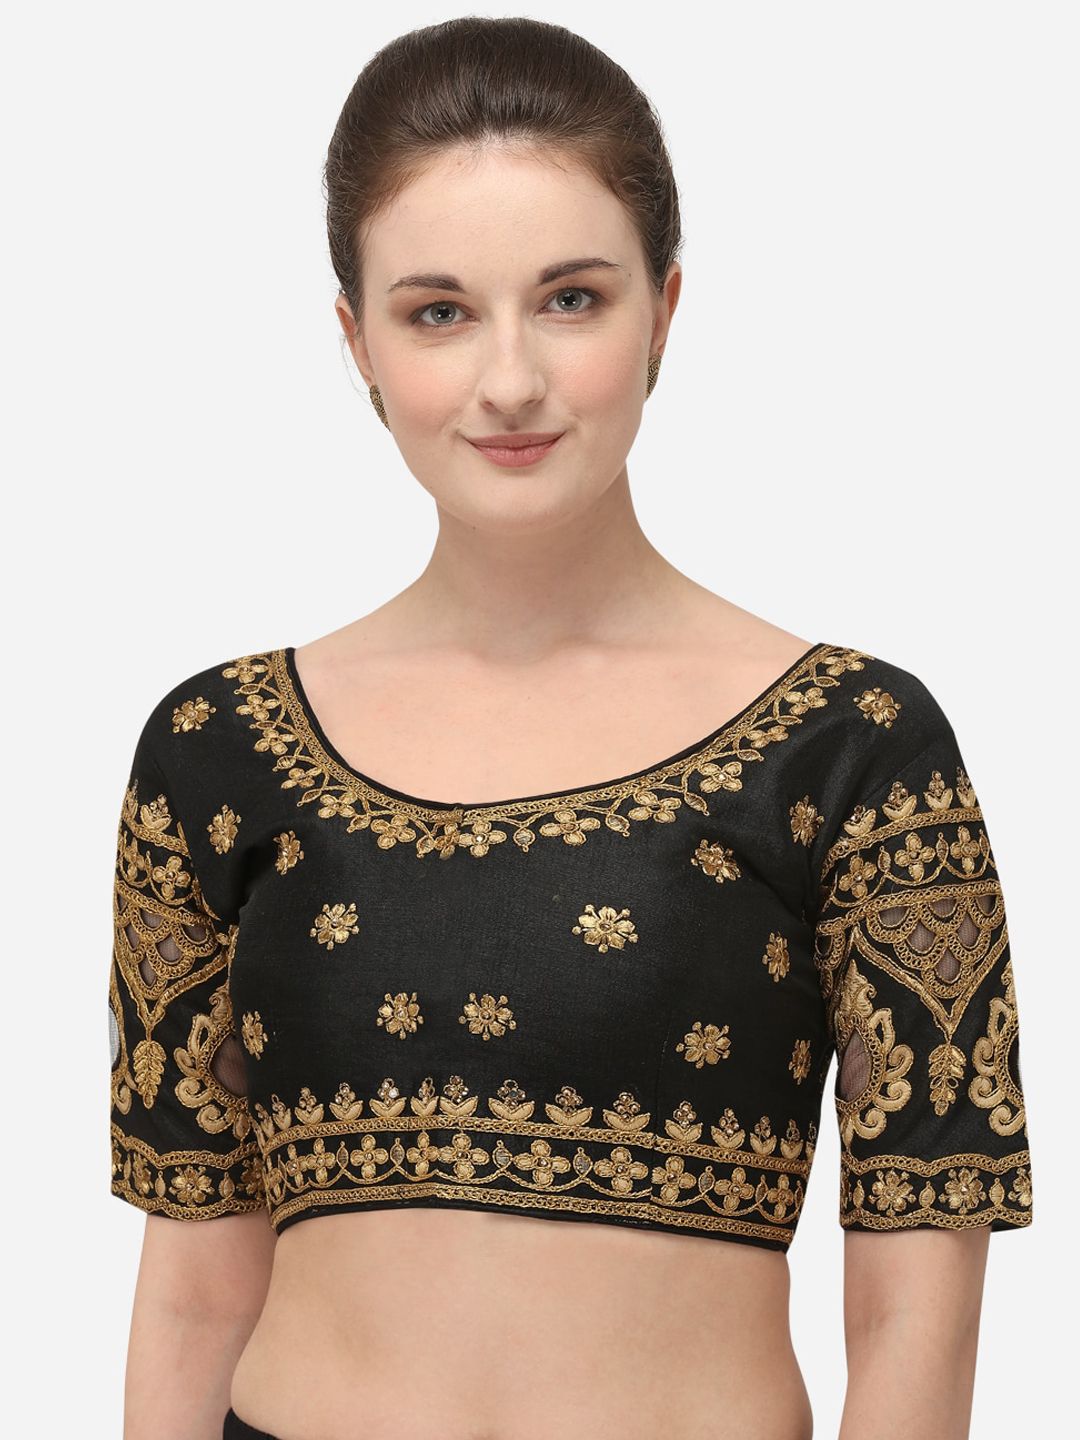 Amrutam Fab Women Black & Gold-Coloured Embroidered Phantom Silk Stitched Saree Blouse Price in India